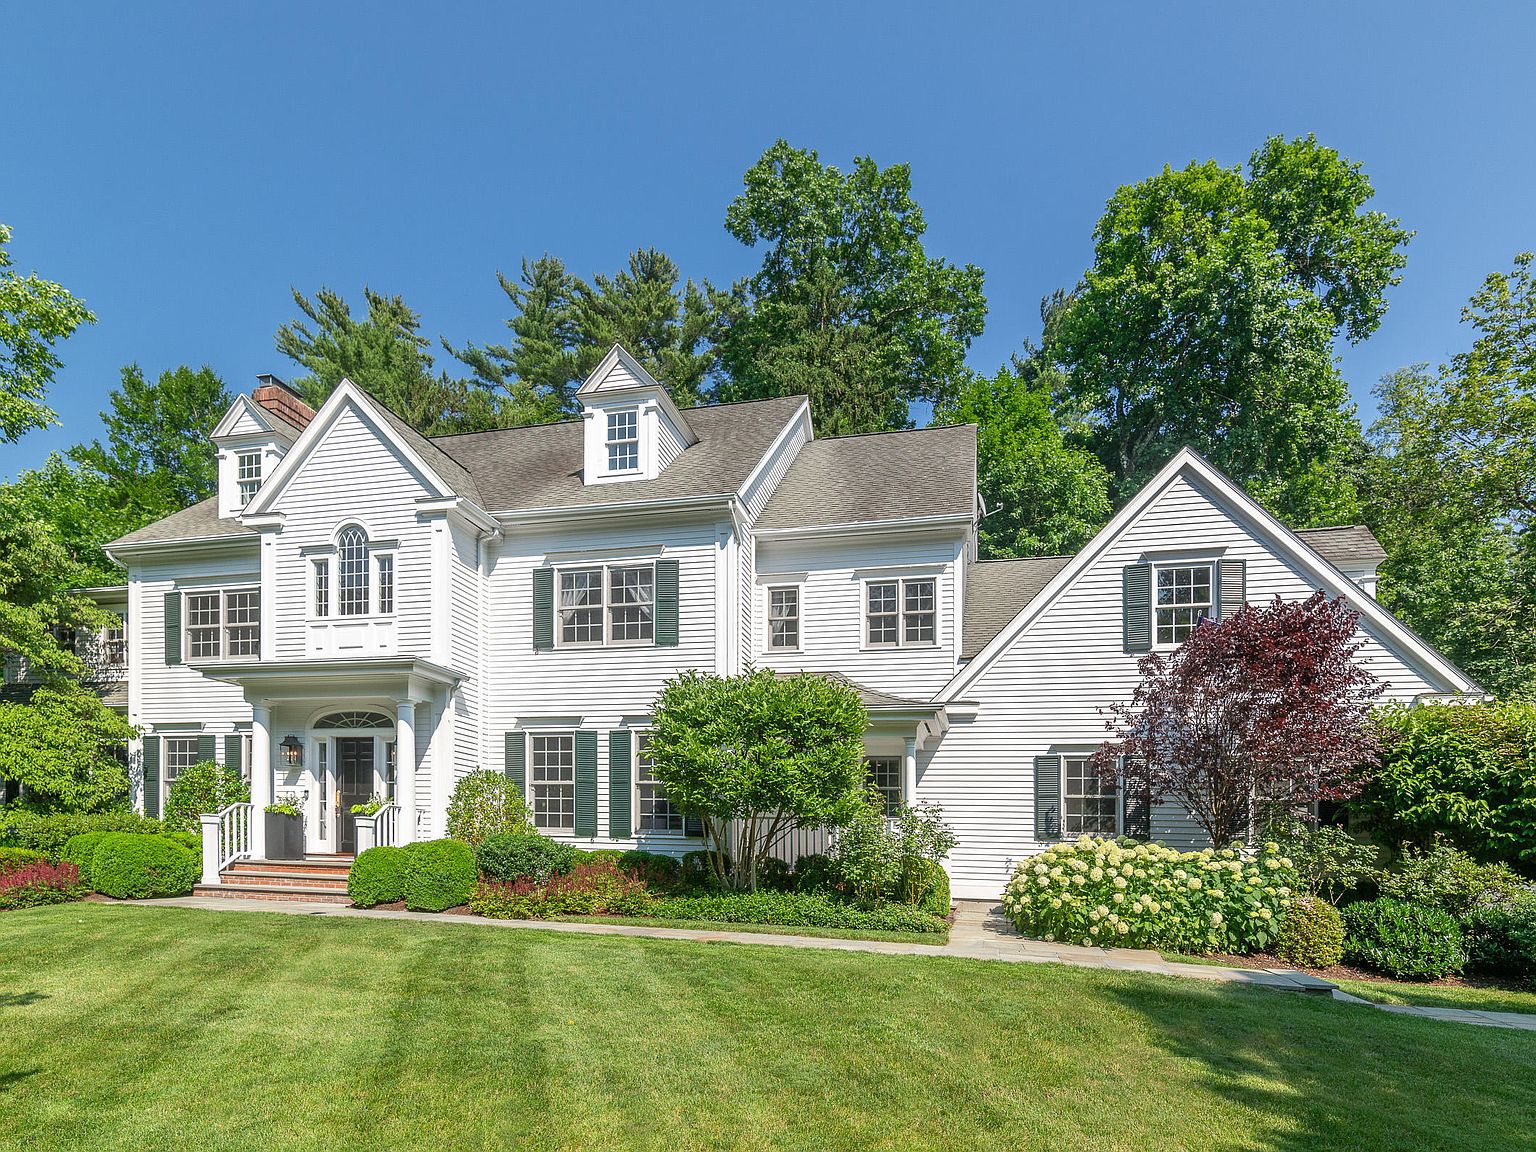 123 Valley Dr, Greenwich, CT 06831 | Zillow